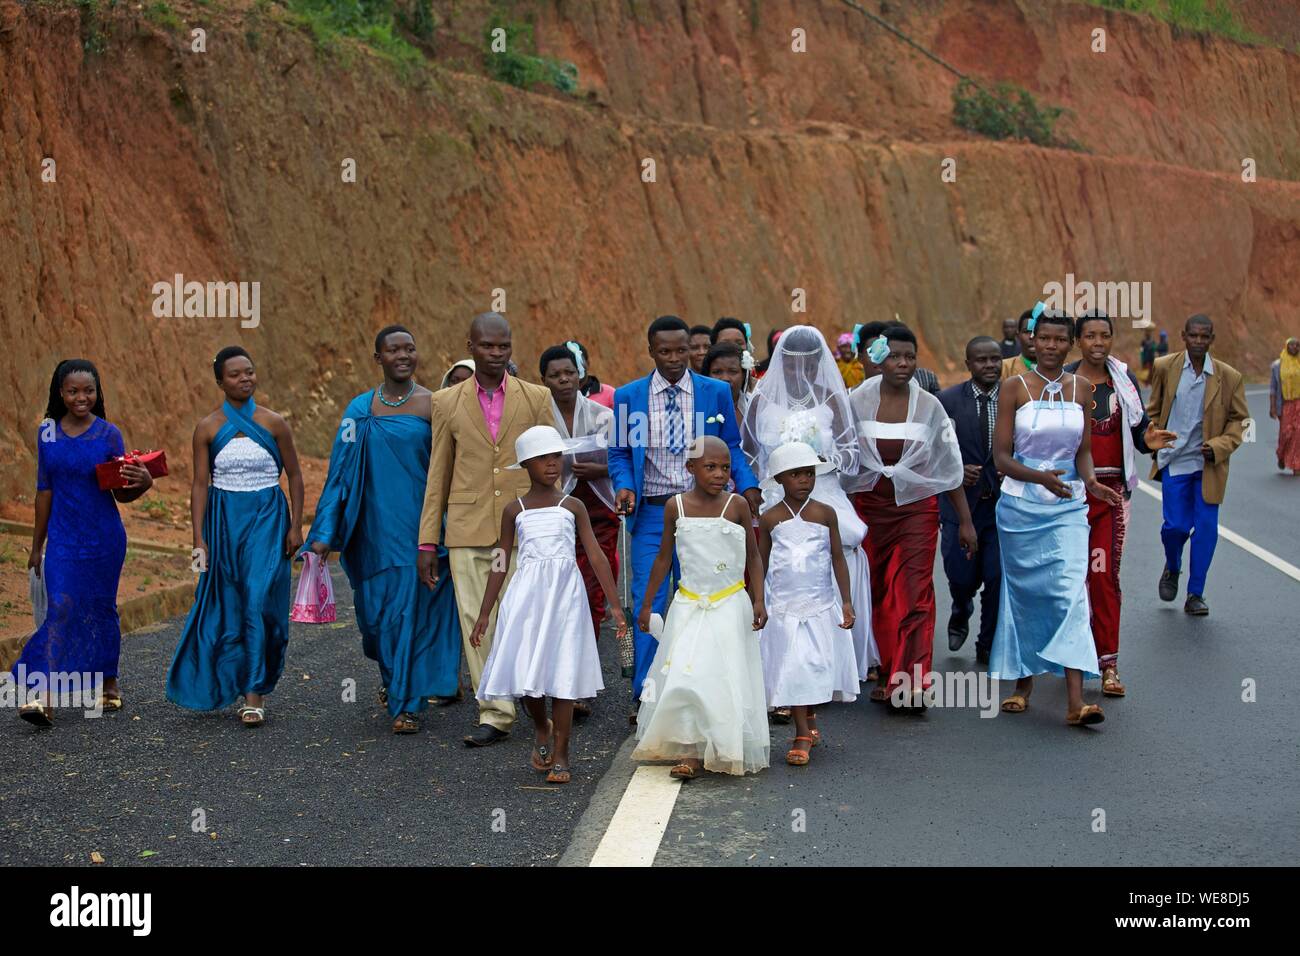 Rwanda, center of the country, married and their guests walking on the road Stock Photo